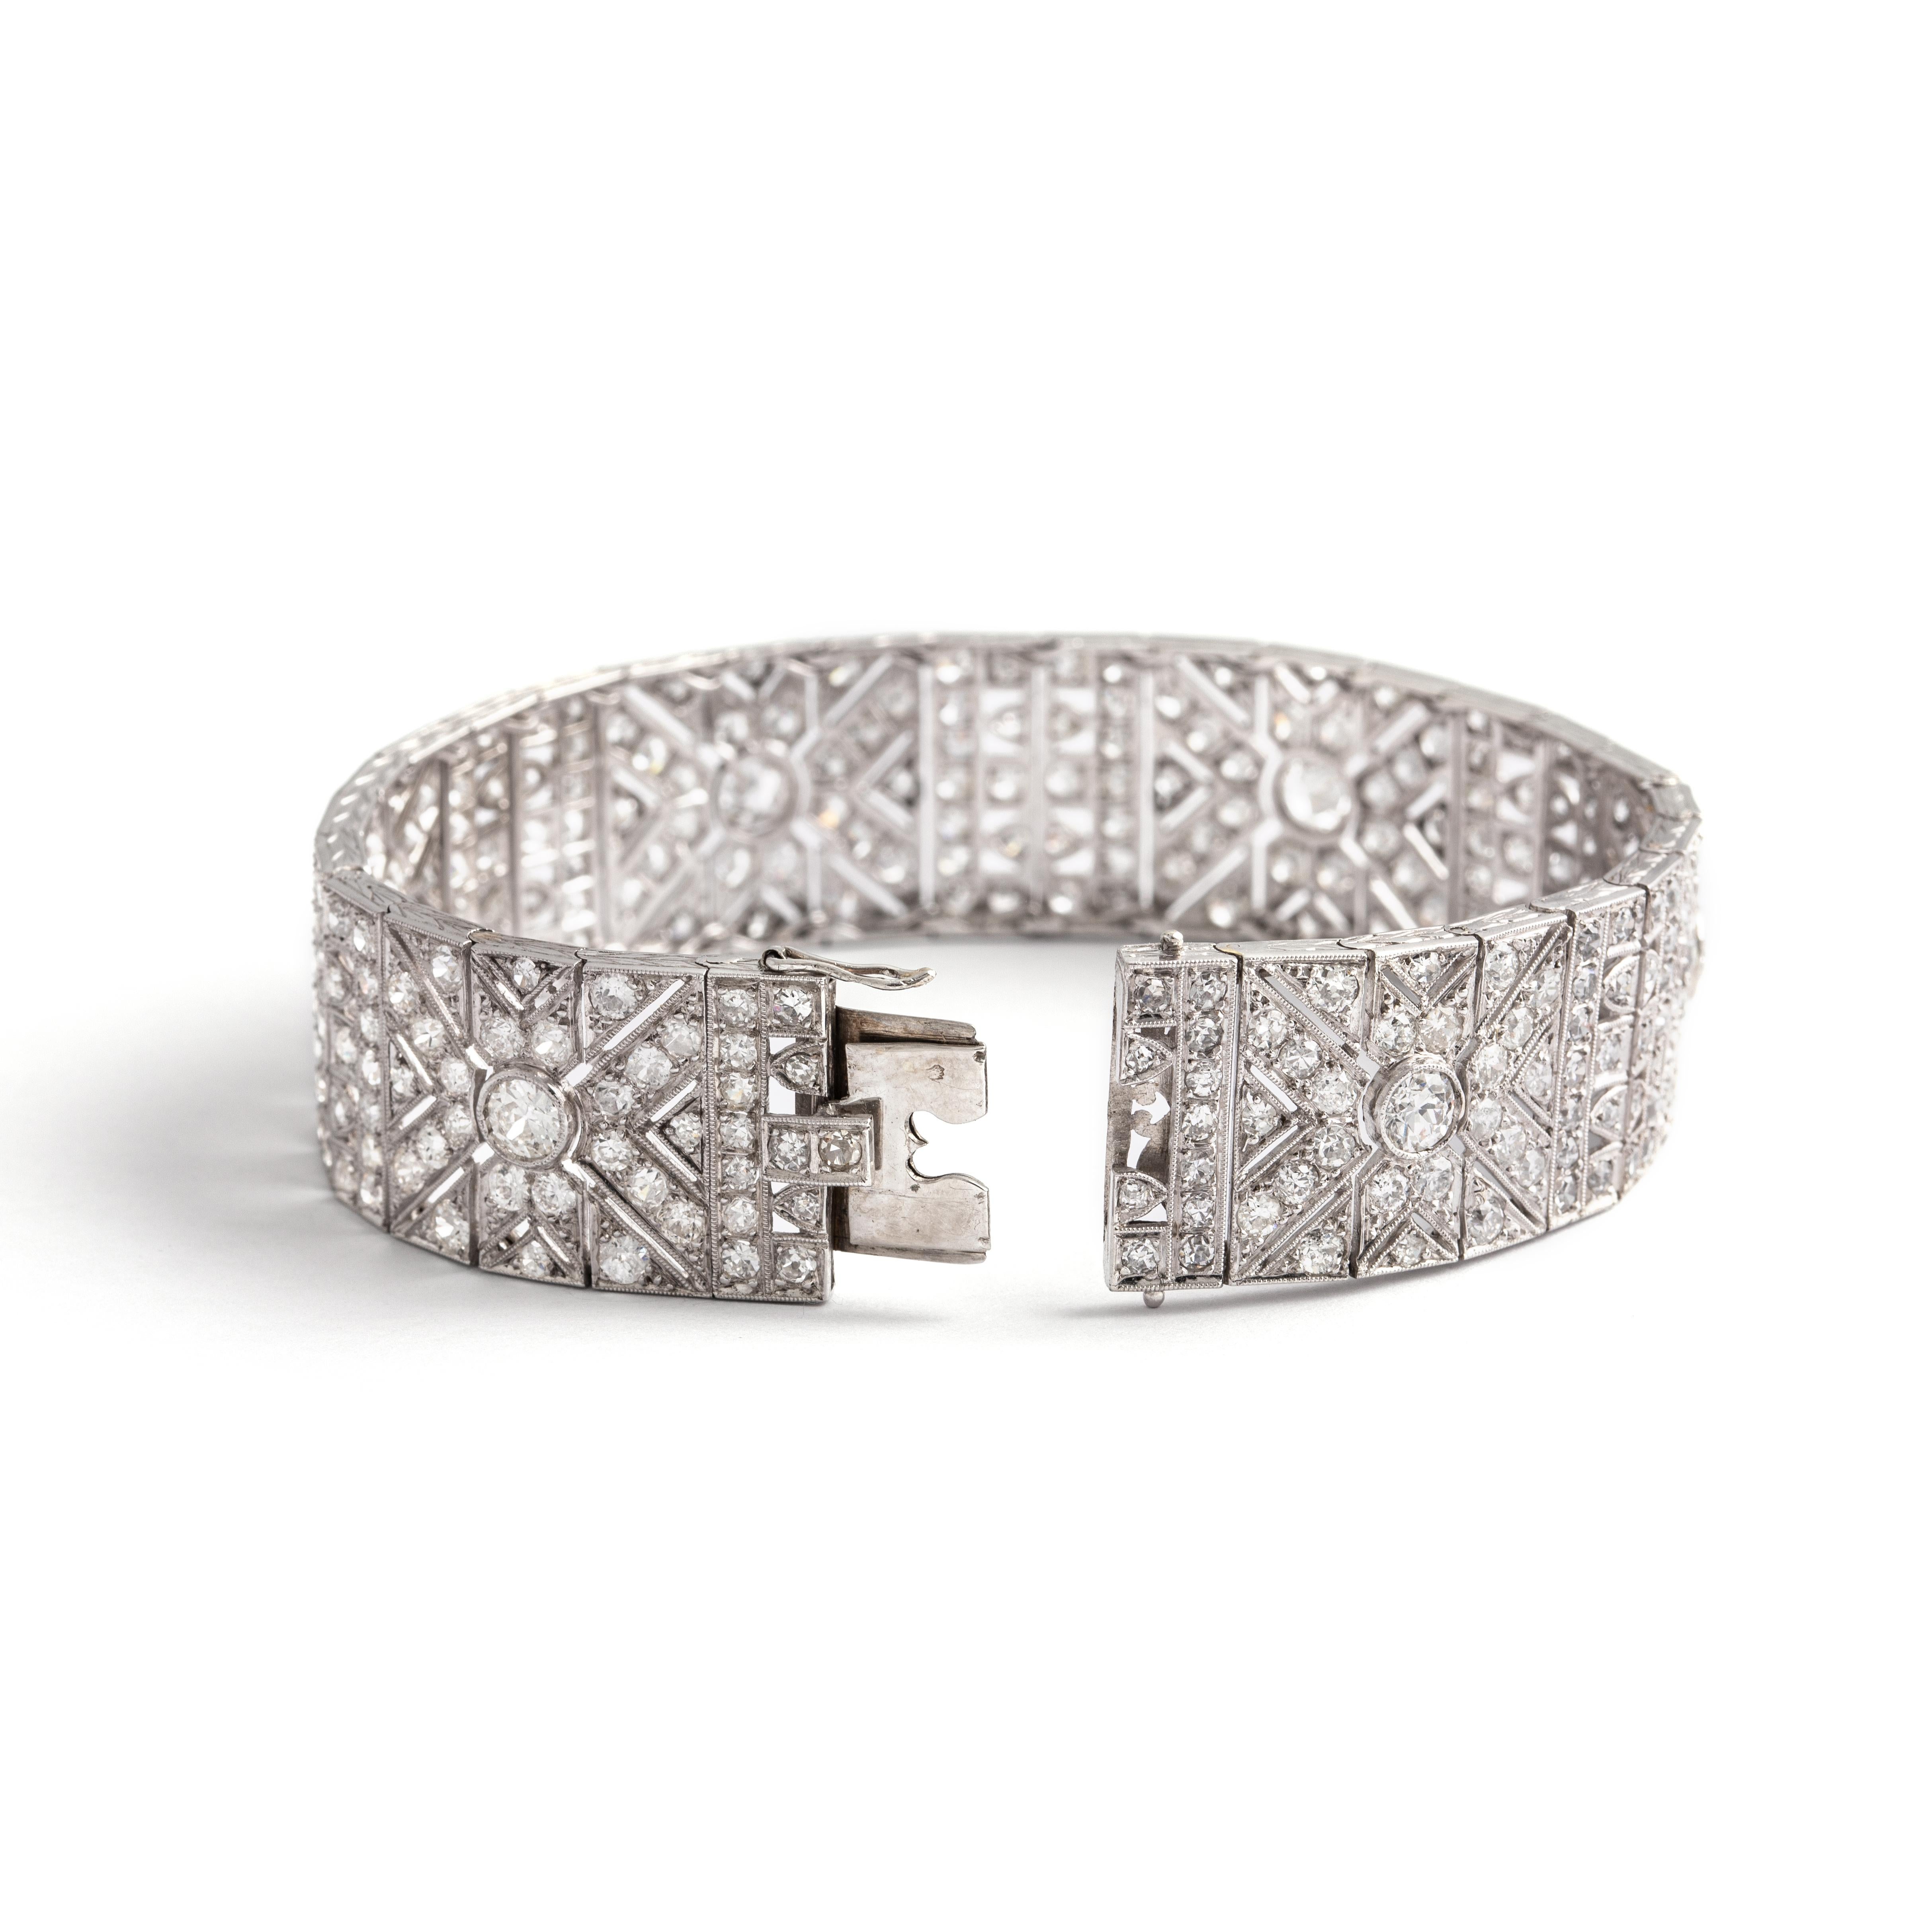 French Art Deco Diamond Platinum Bracelet.
French assay mark. Early 20th Century.

Length: 18.40 centimeters.
Width: 1.70 centimeters.
Gross Weight: 42.46 grams.
